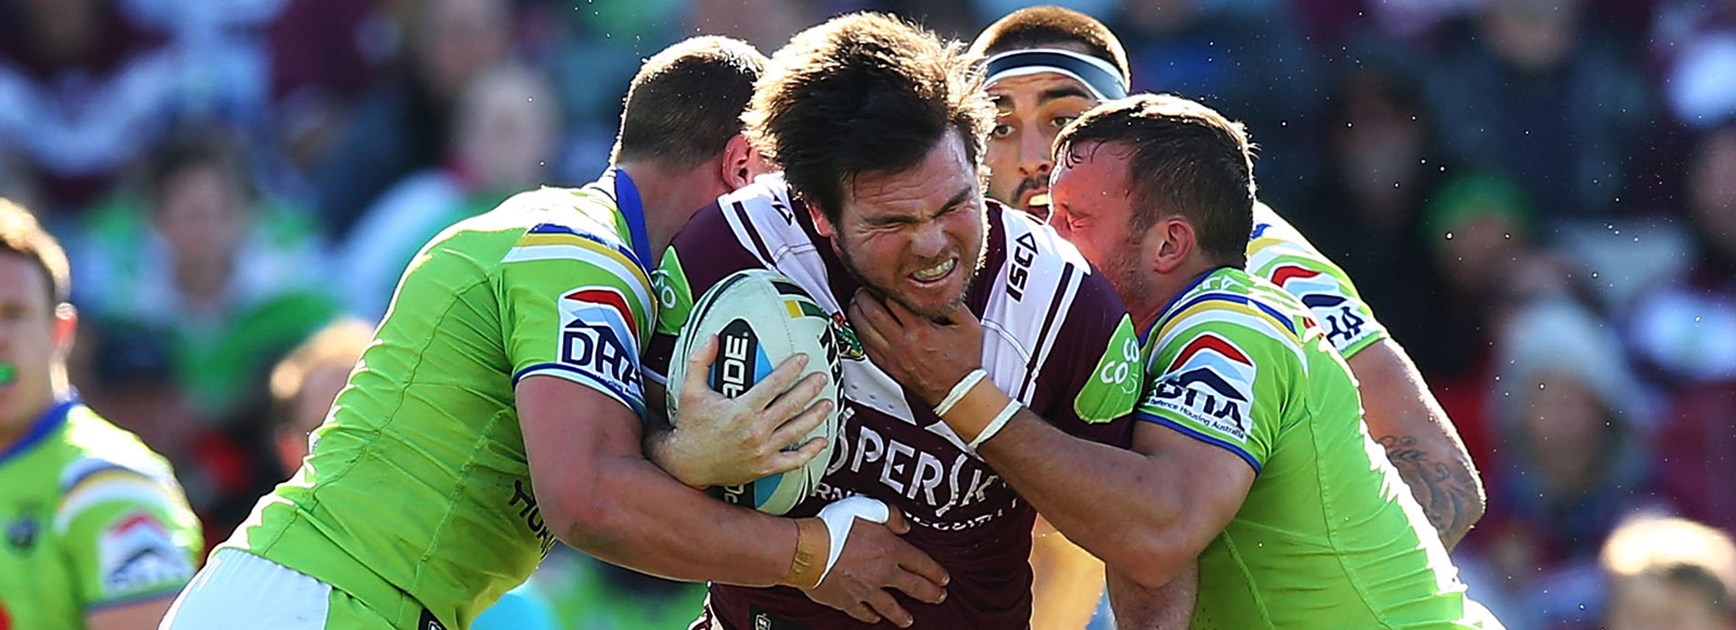 Jamie Lyon was immense for the Sea Eagles against the Raiders in Round 23.